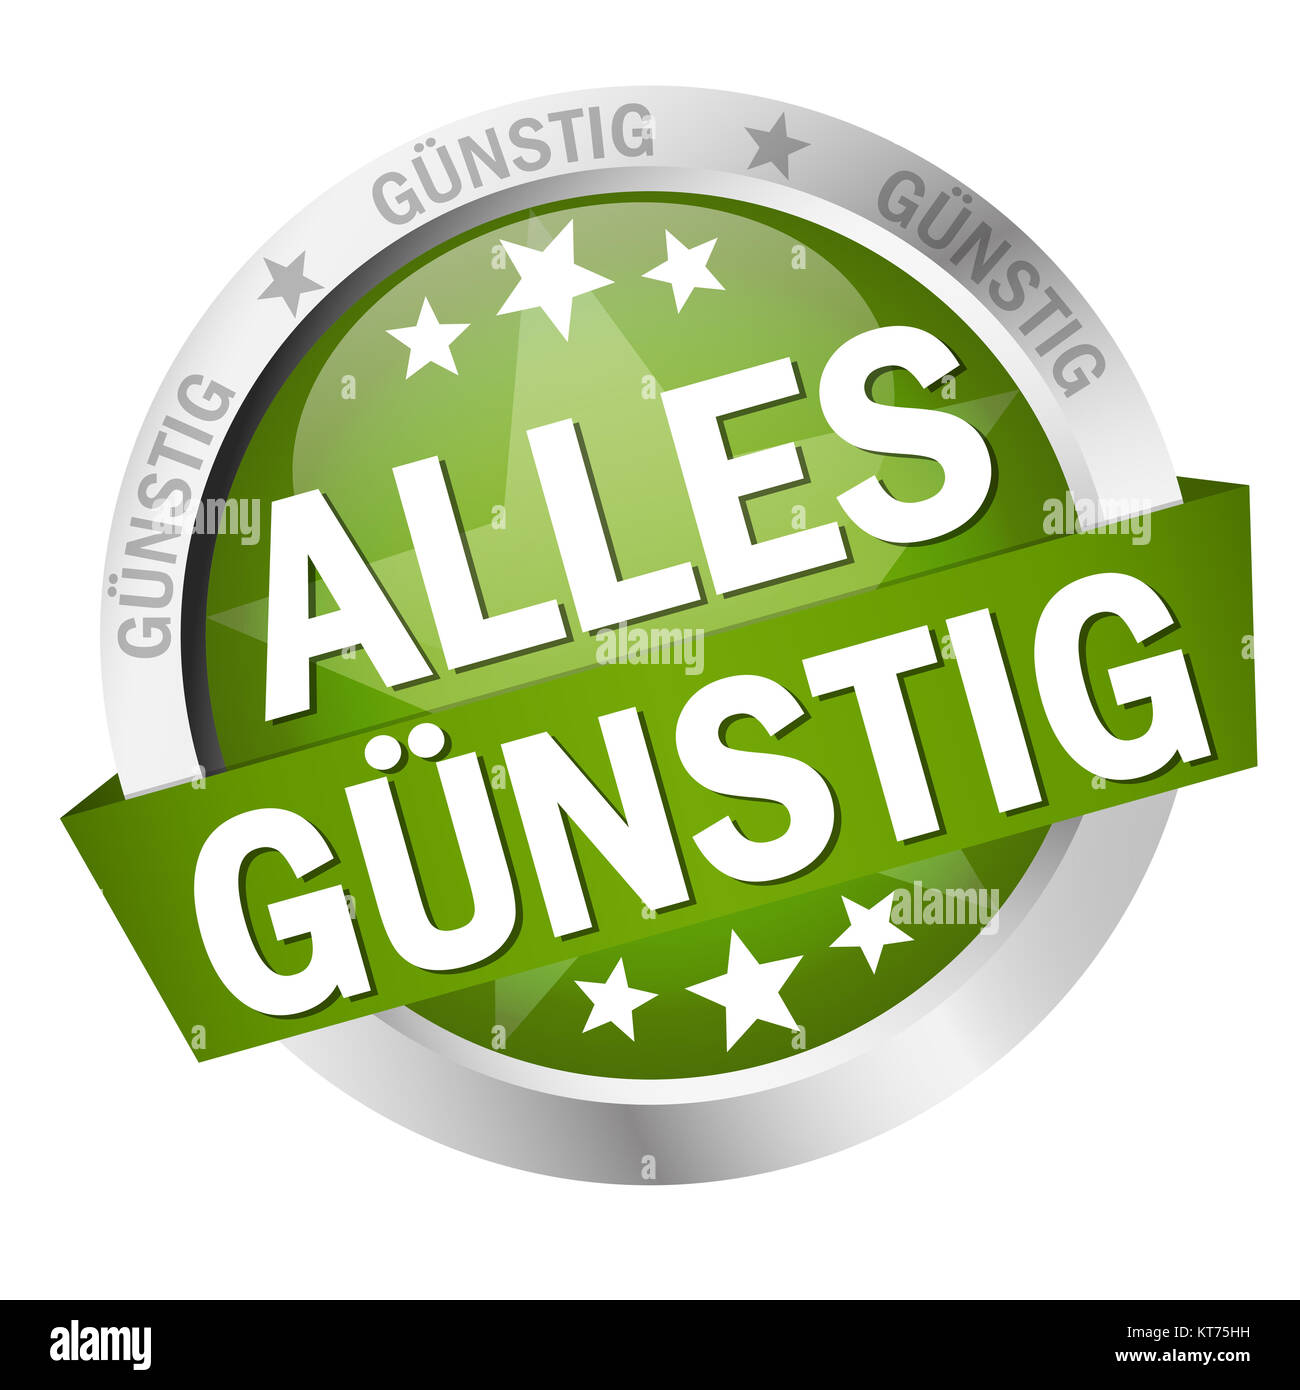 colored button with banner and text Alles günstig Stock Photo